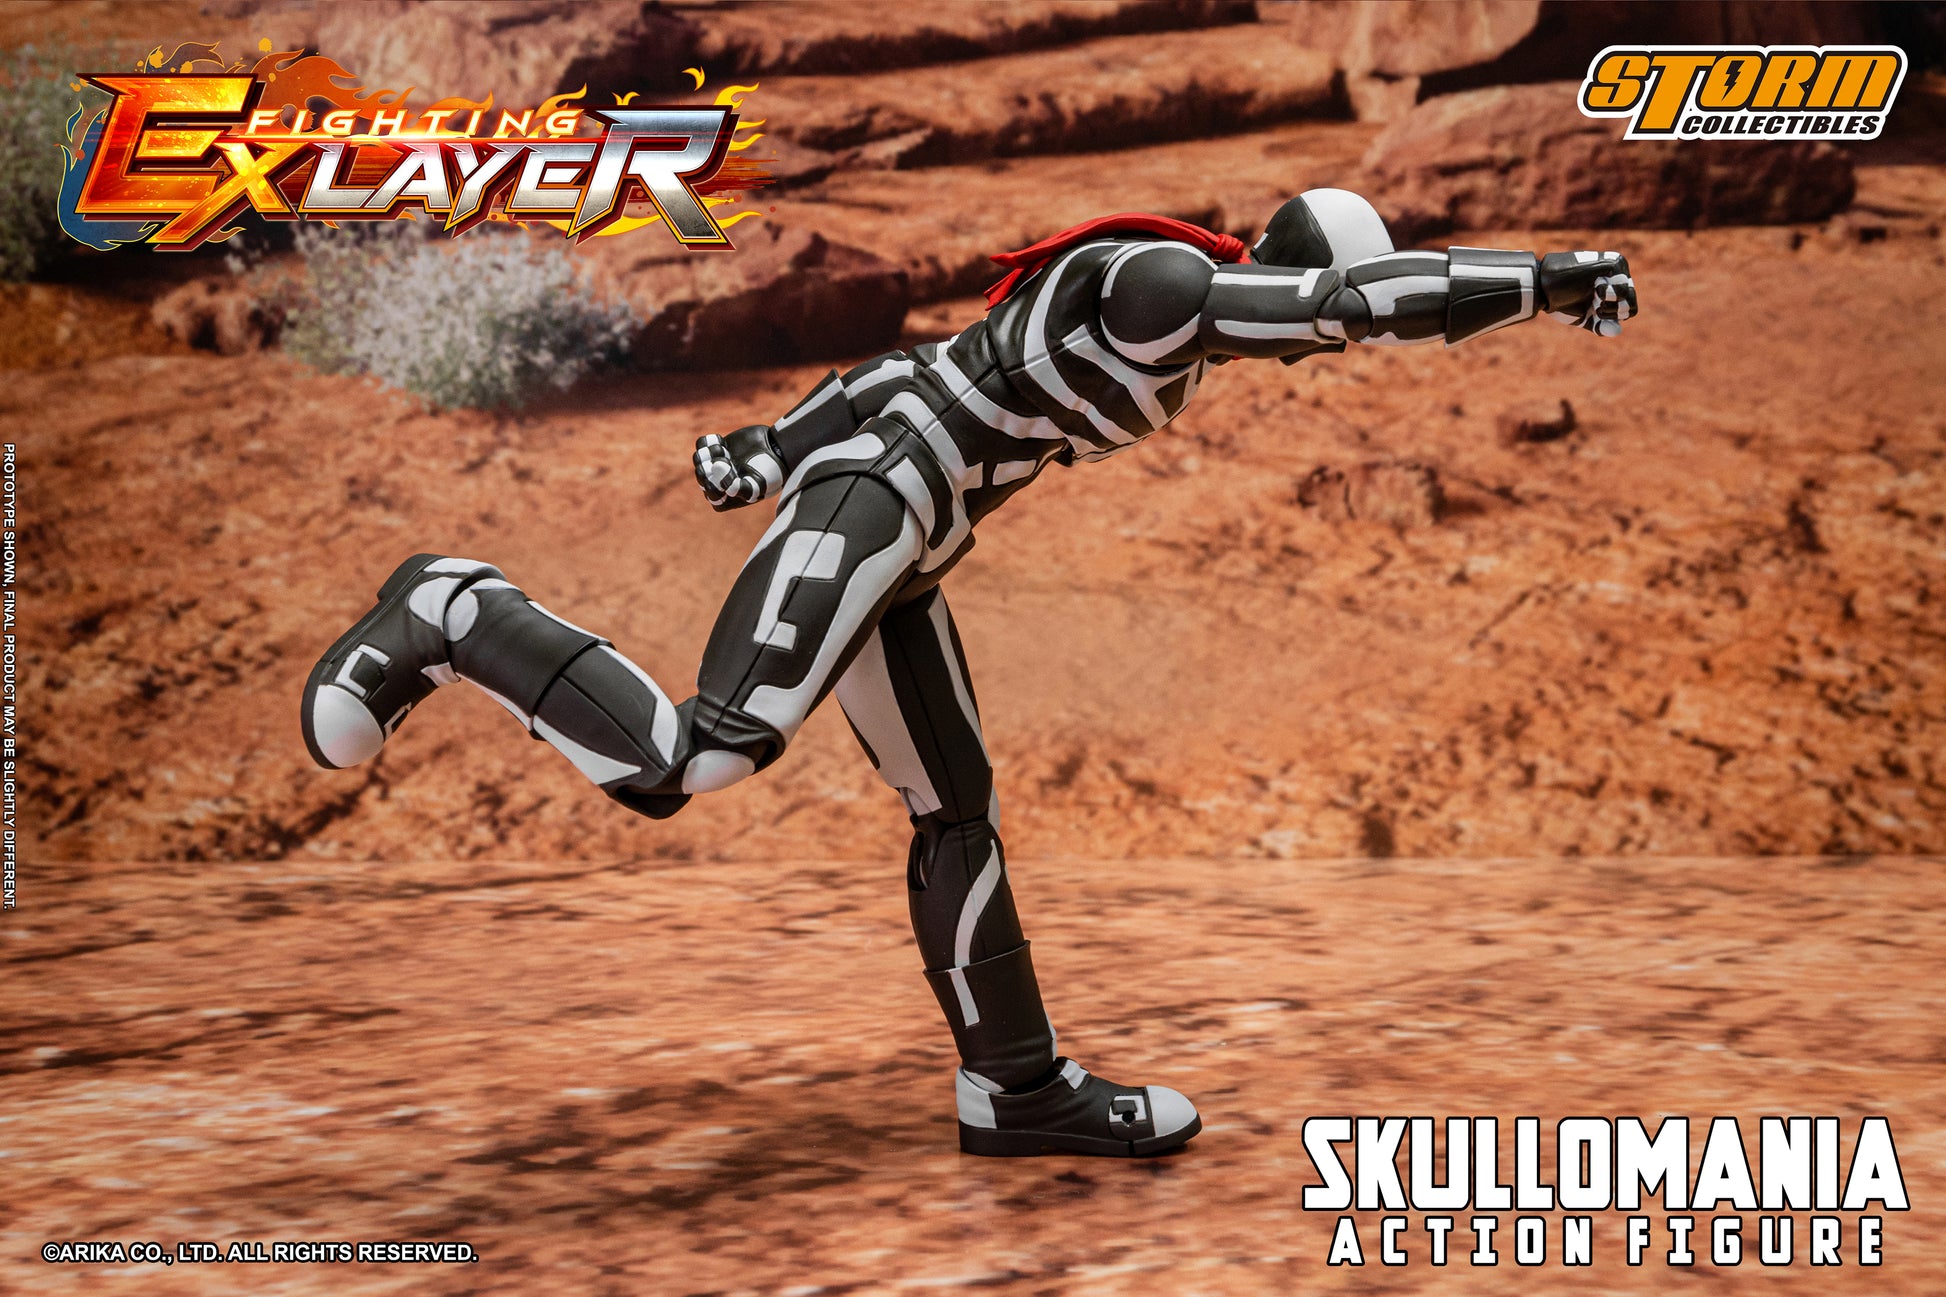 Street Fighter EX Layer Skullomania 1/12 Scale by Storm Collectibles punching pose